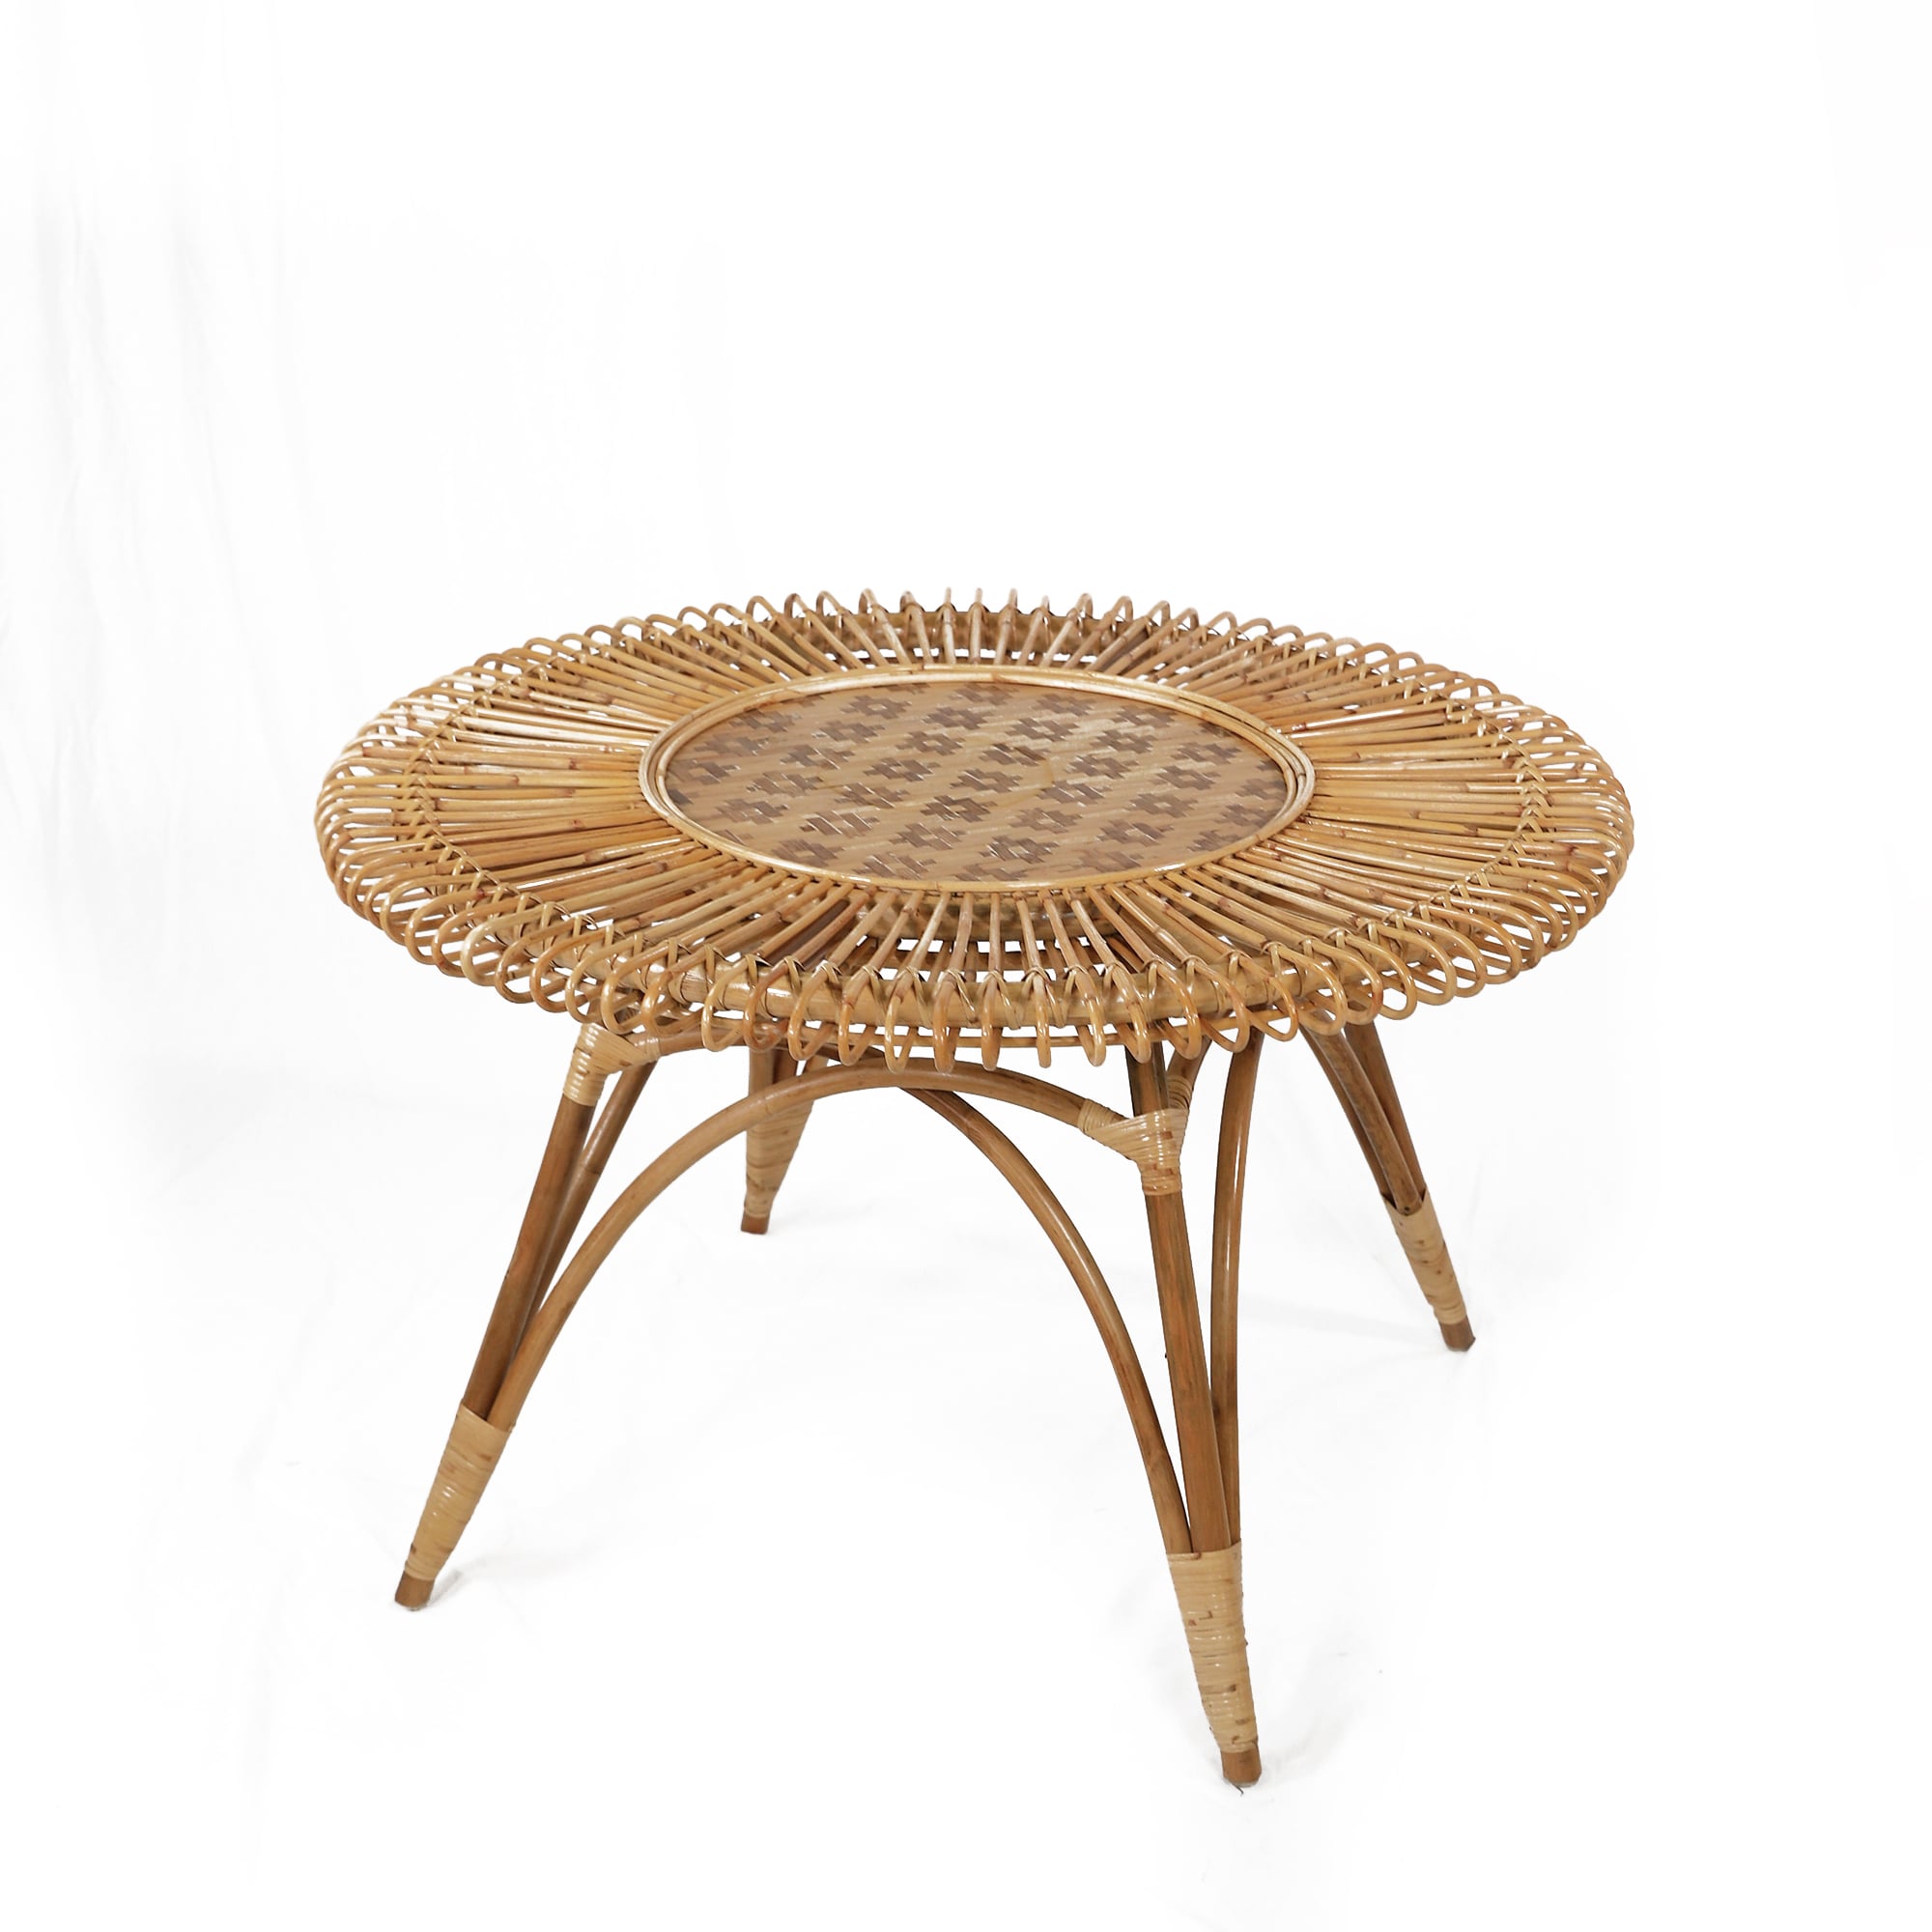 Vintage Round Rattan Wicker Coffee Table FN568138